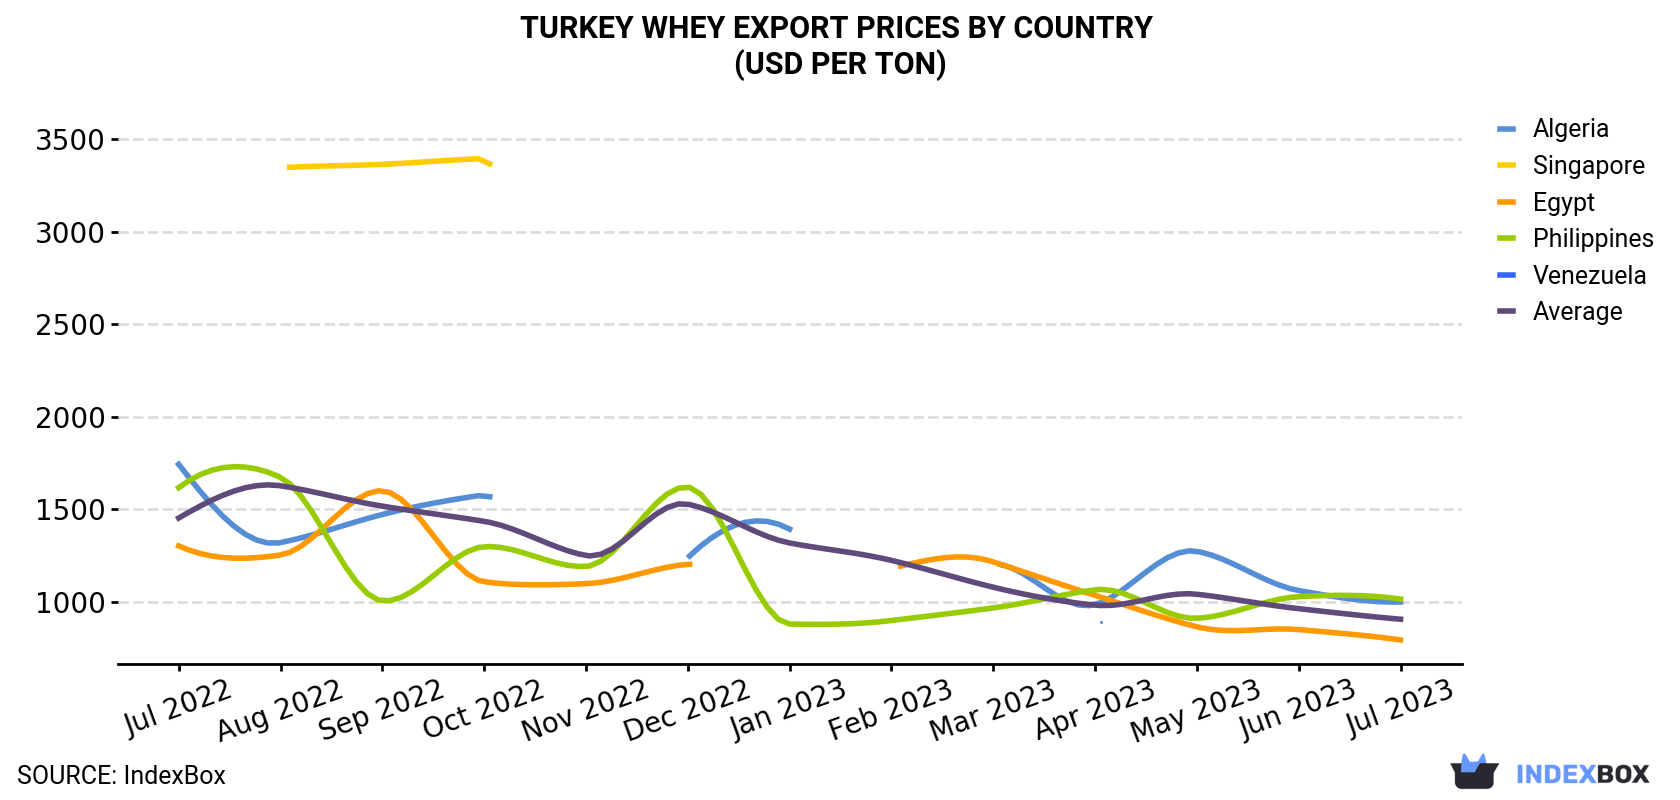 Turkey Whey Export Prices By Country (USD Per Ton)